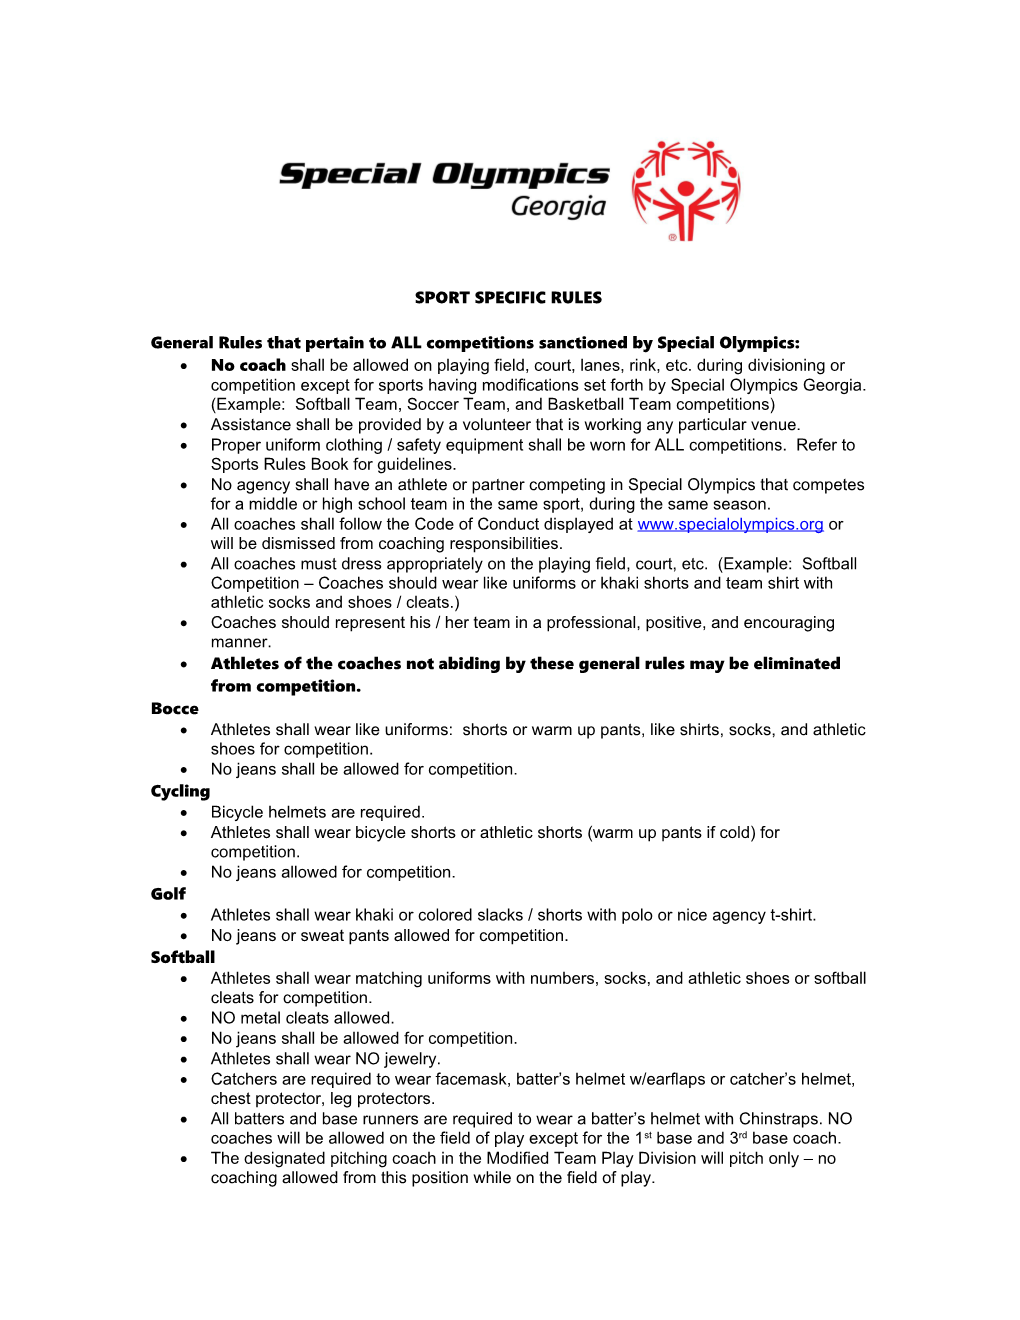 General Rules That Pertain to ALL Competitions Sanctioned by Special Olympics